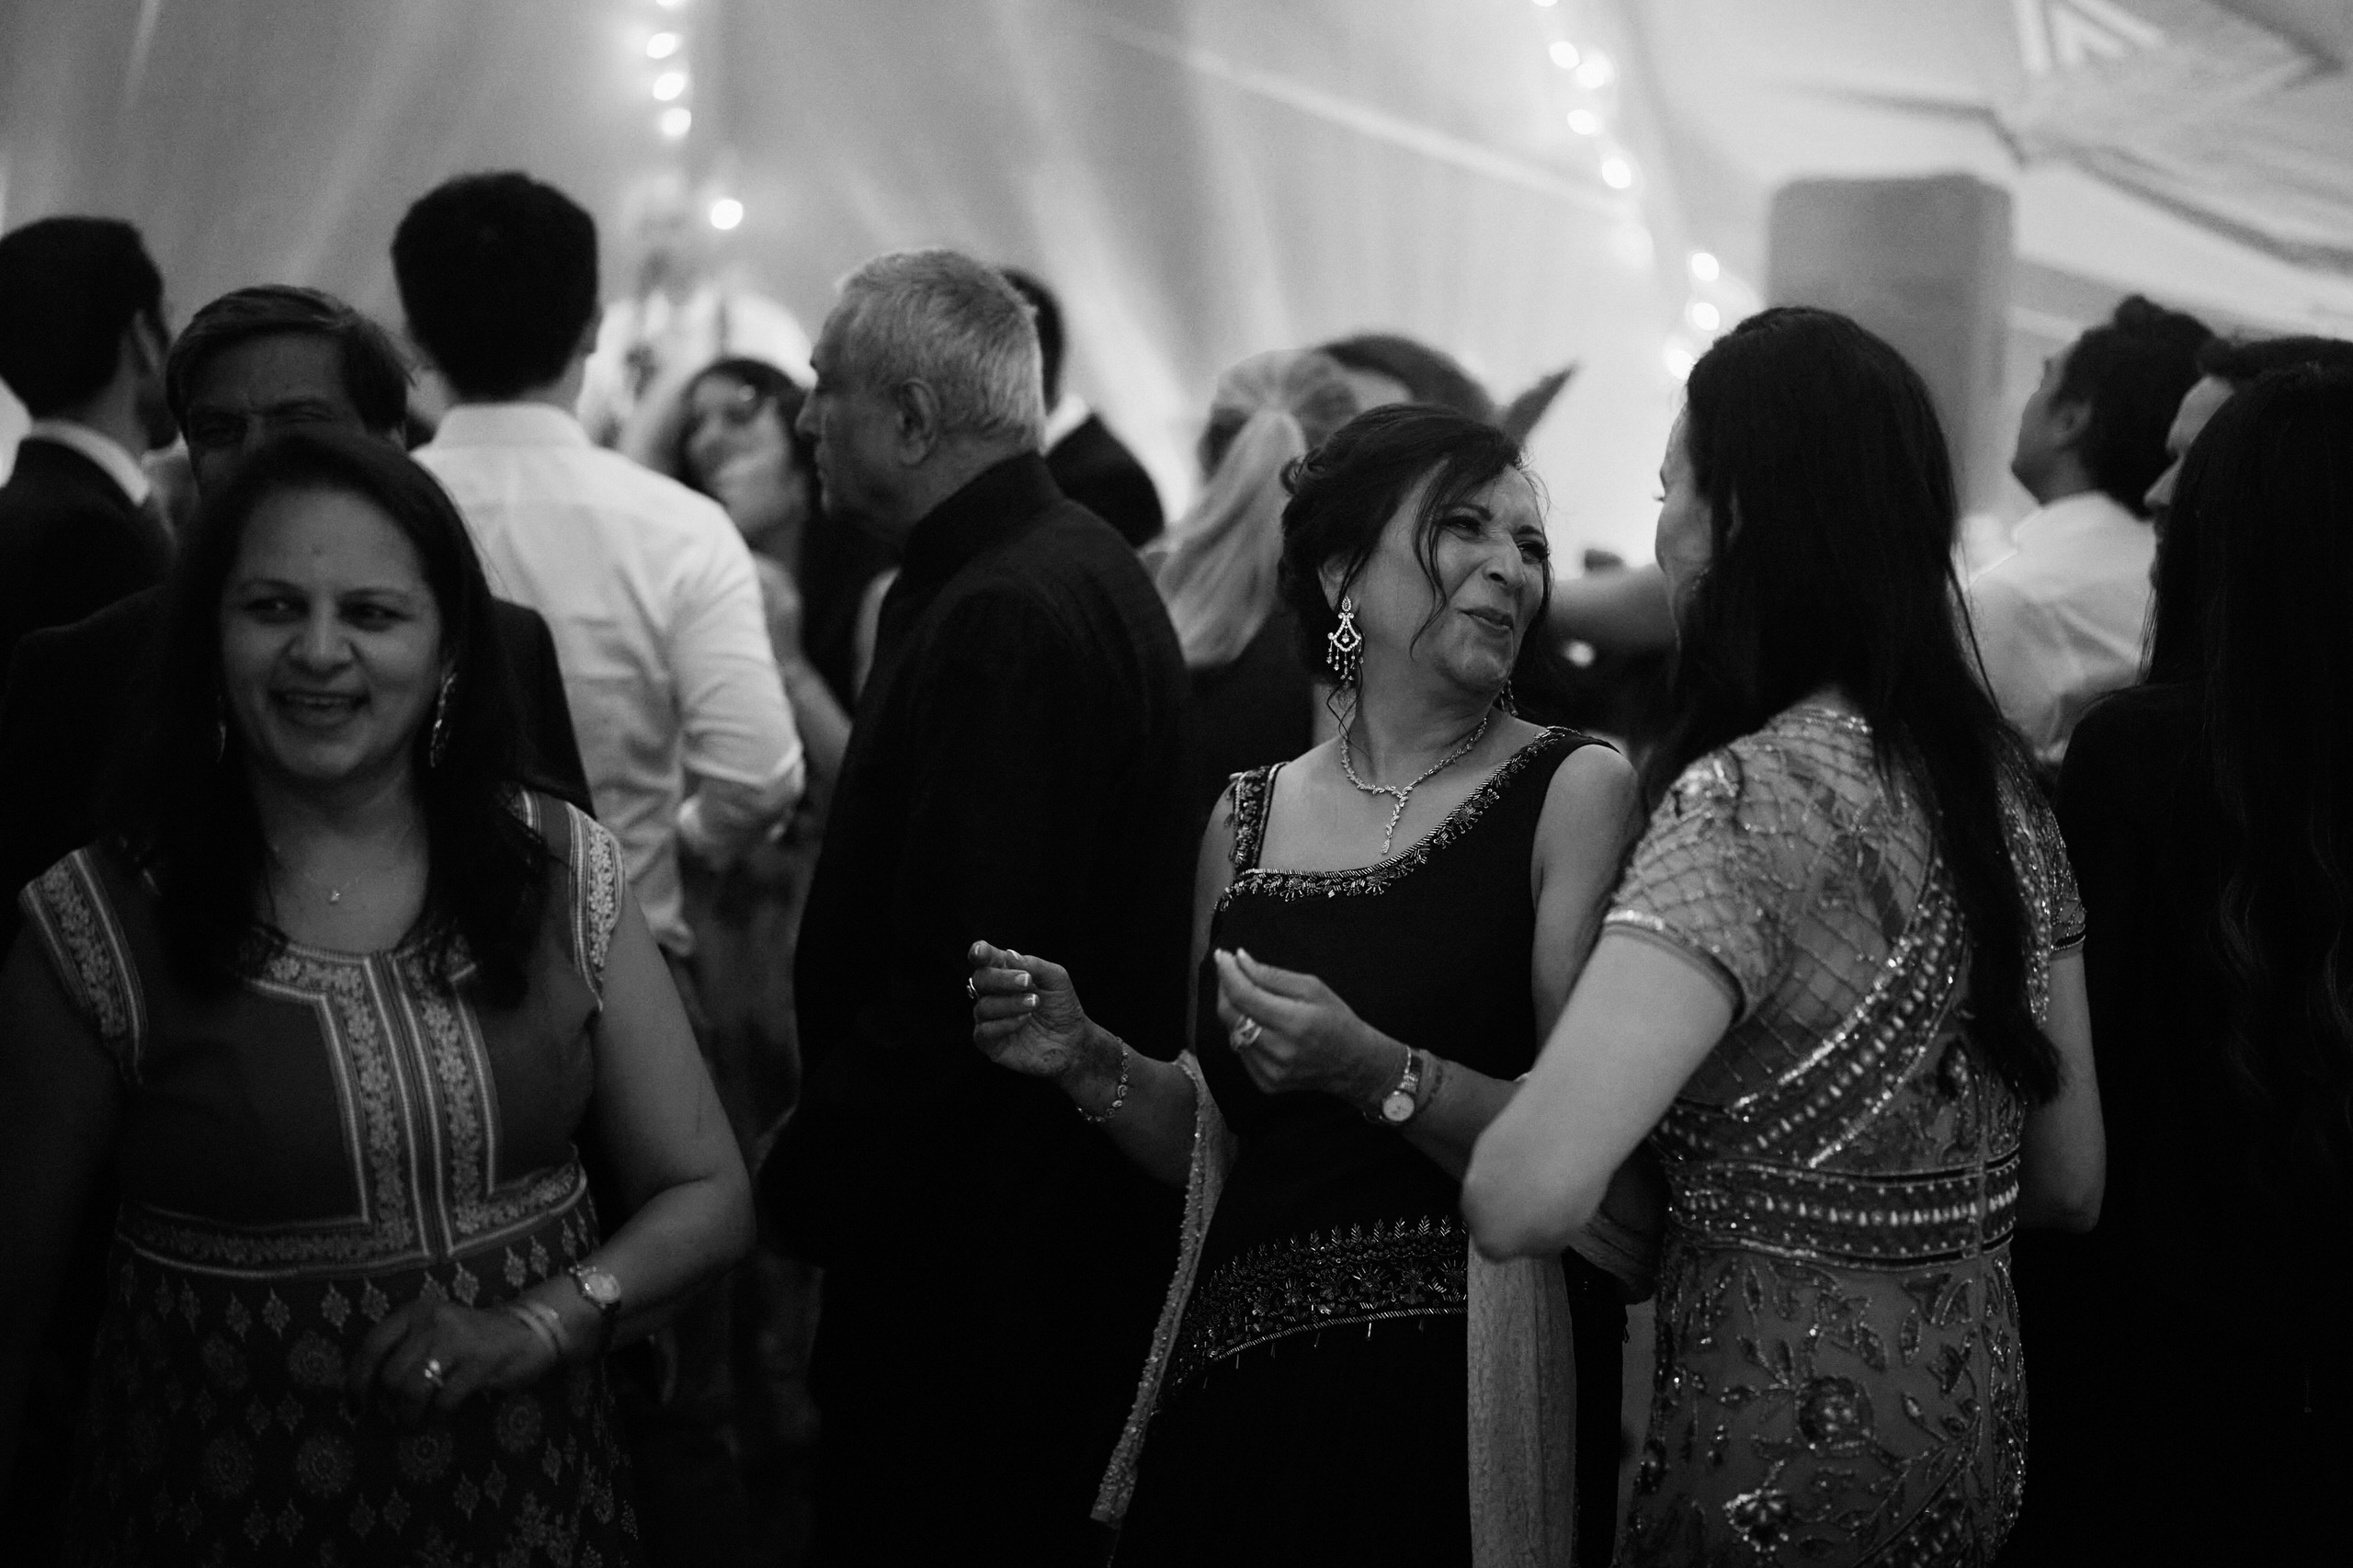 A black and white picture of people dancing at a wedding.